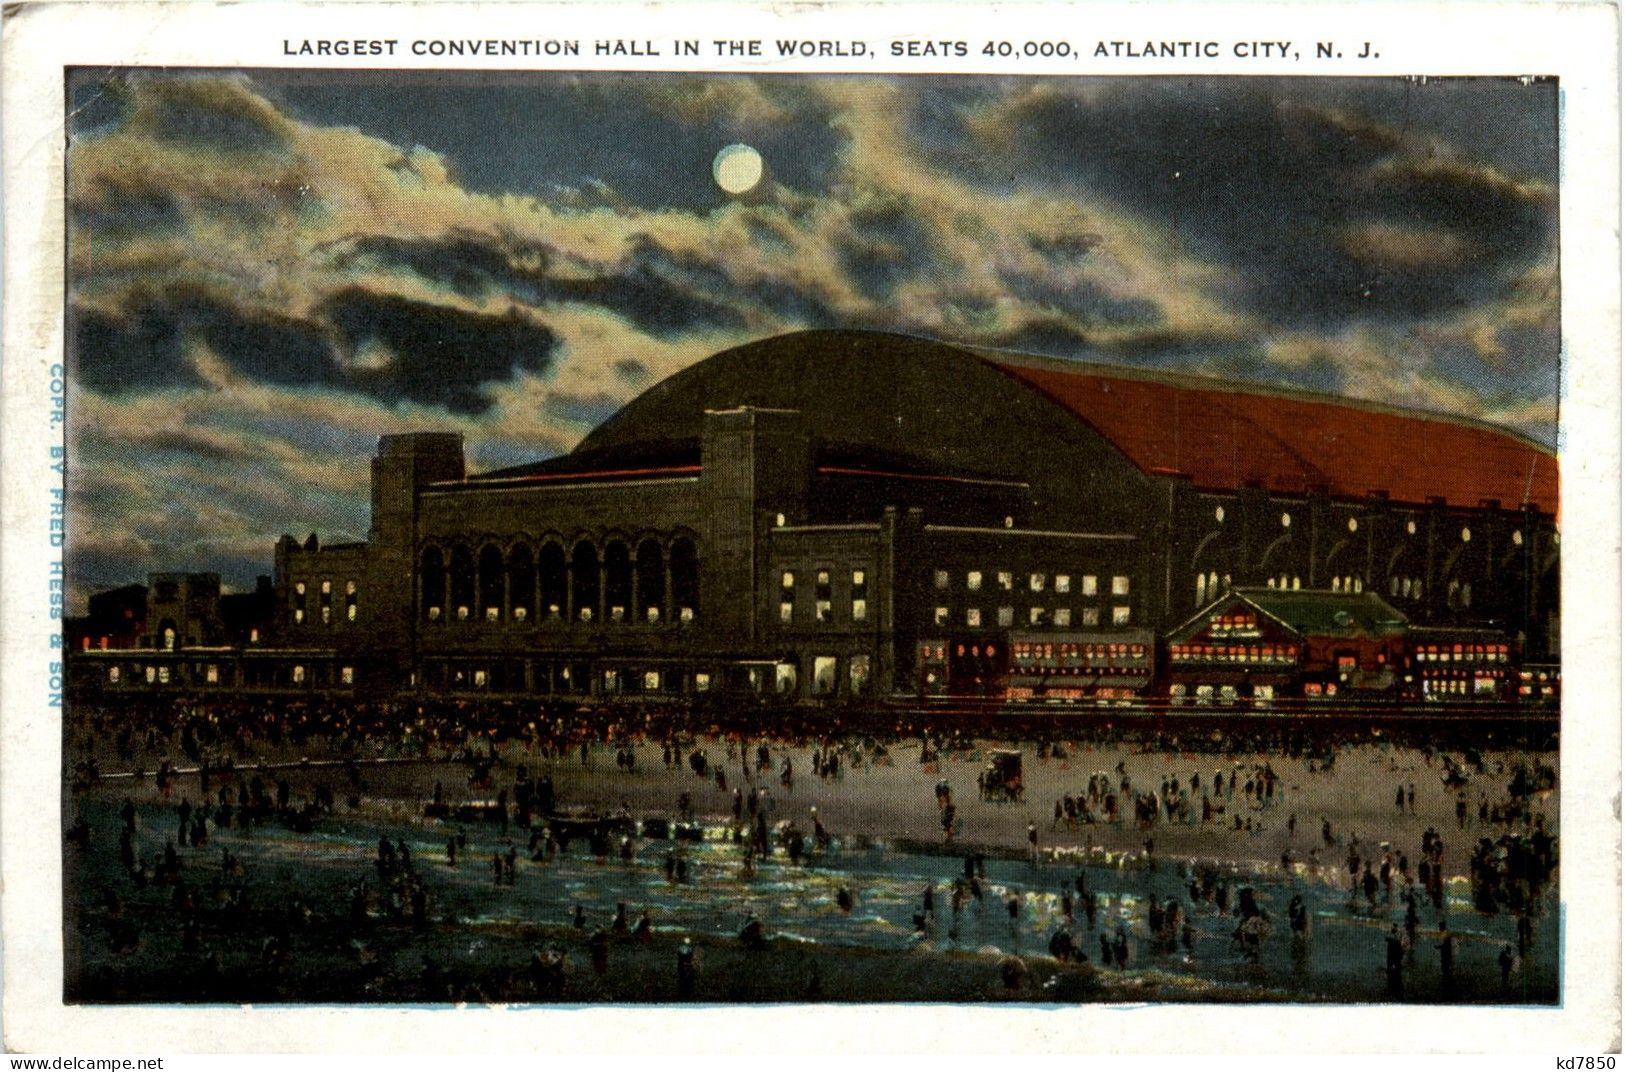 Atlantic City - Largest Convention Hall In The World - Atlantic City